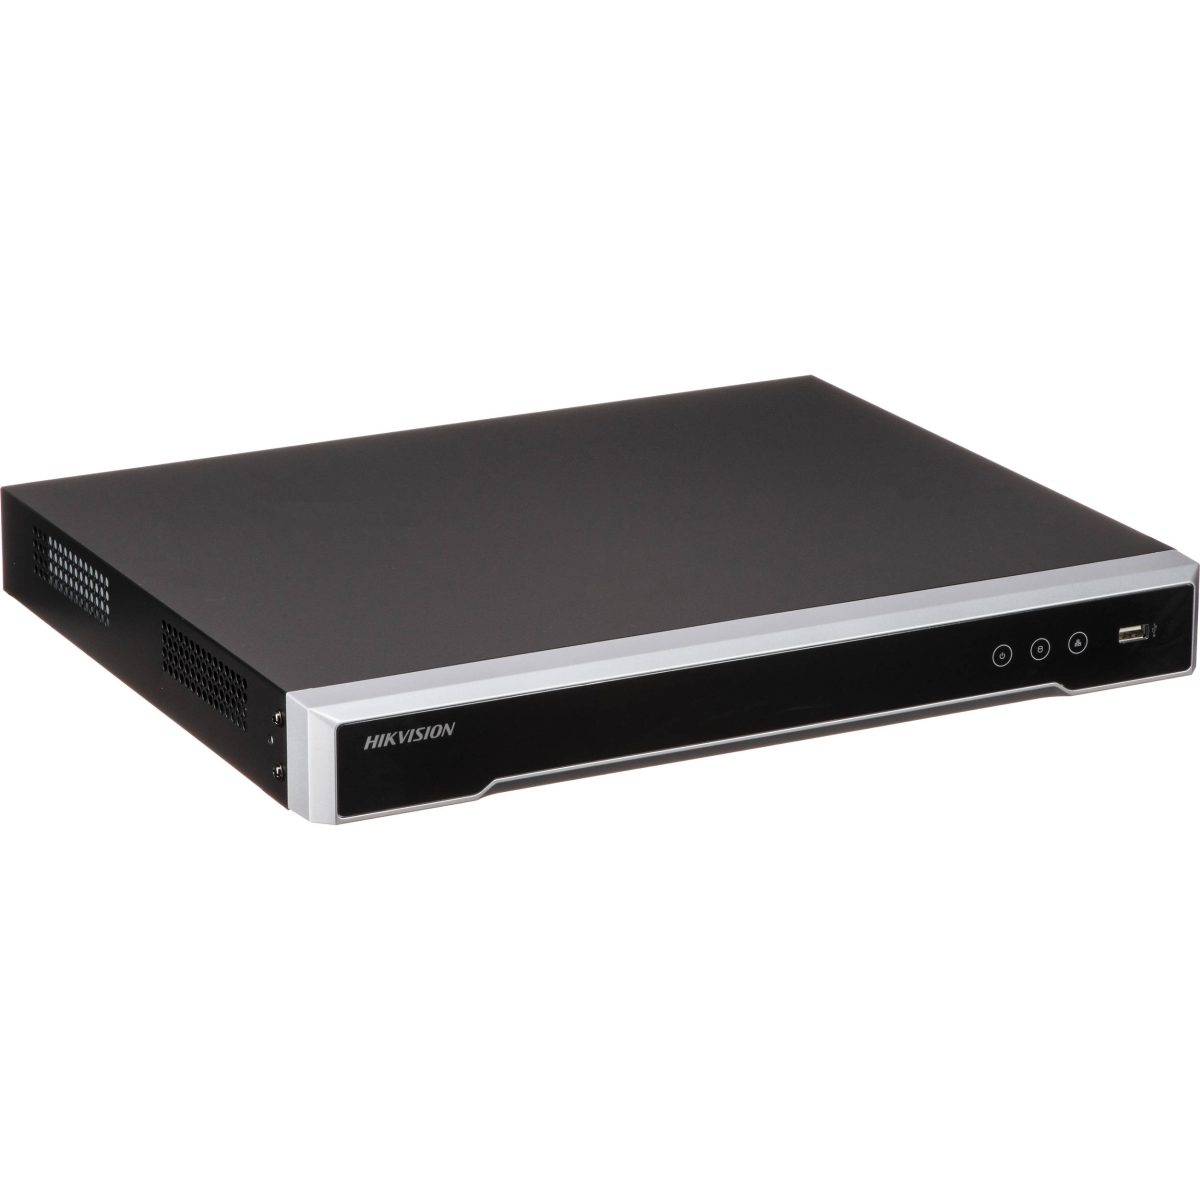 Hikvision DS-7608NI-Q2 8 Channel 2HDD Supported NVR